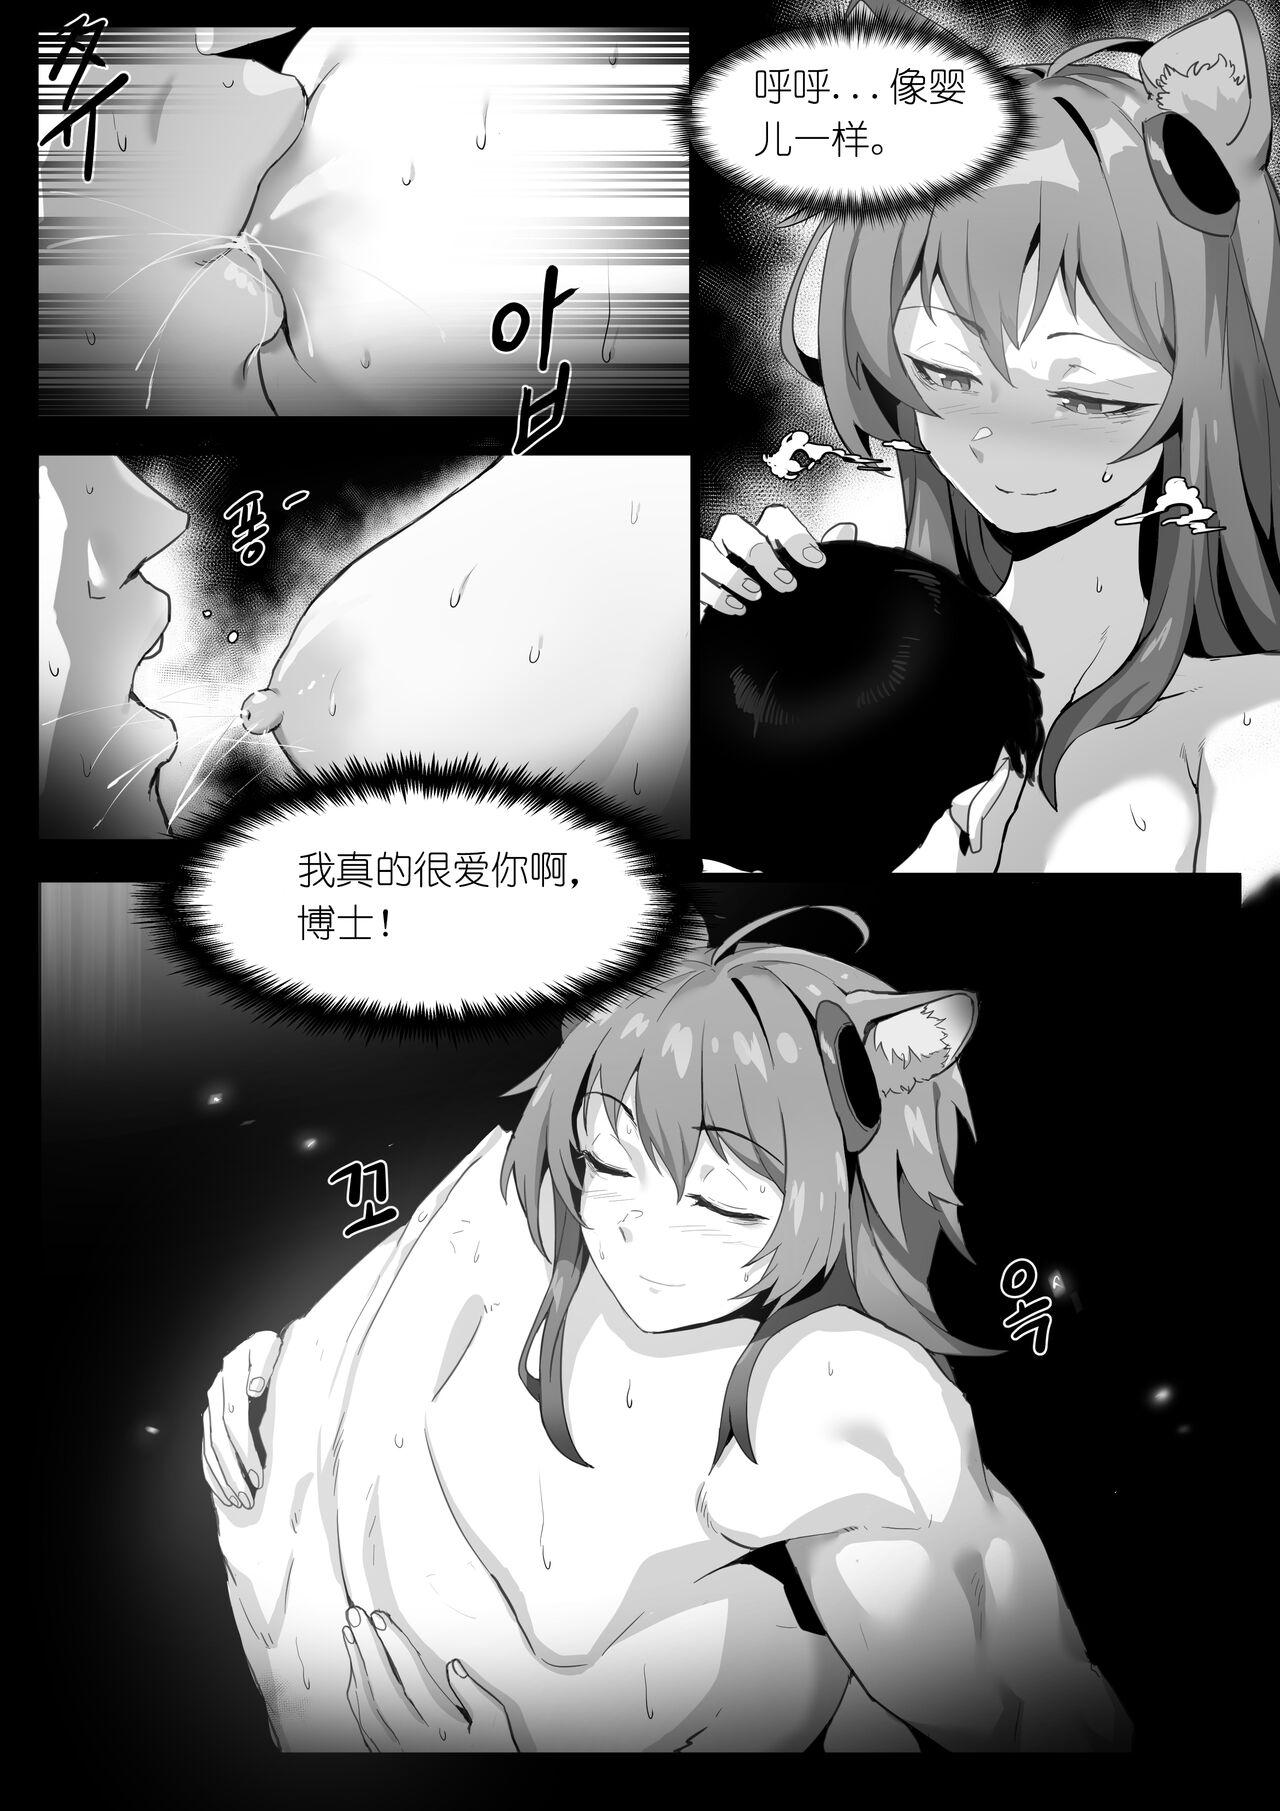 Jerkoff 欲望方舟记录3 - Arknights Freckles - Page 3